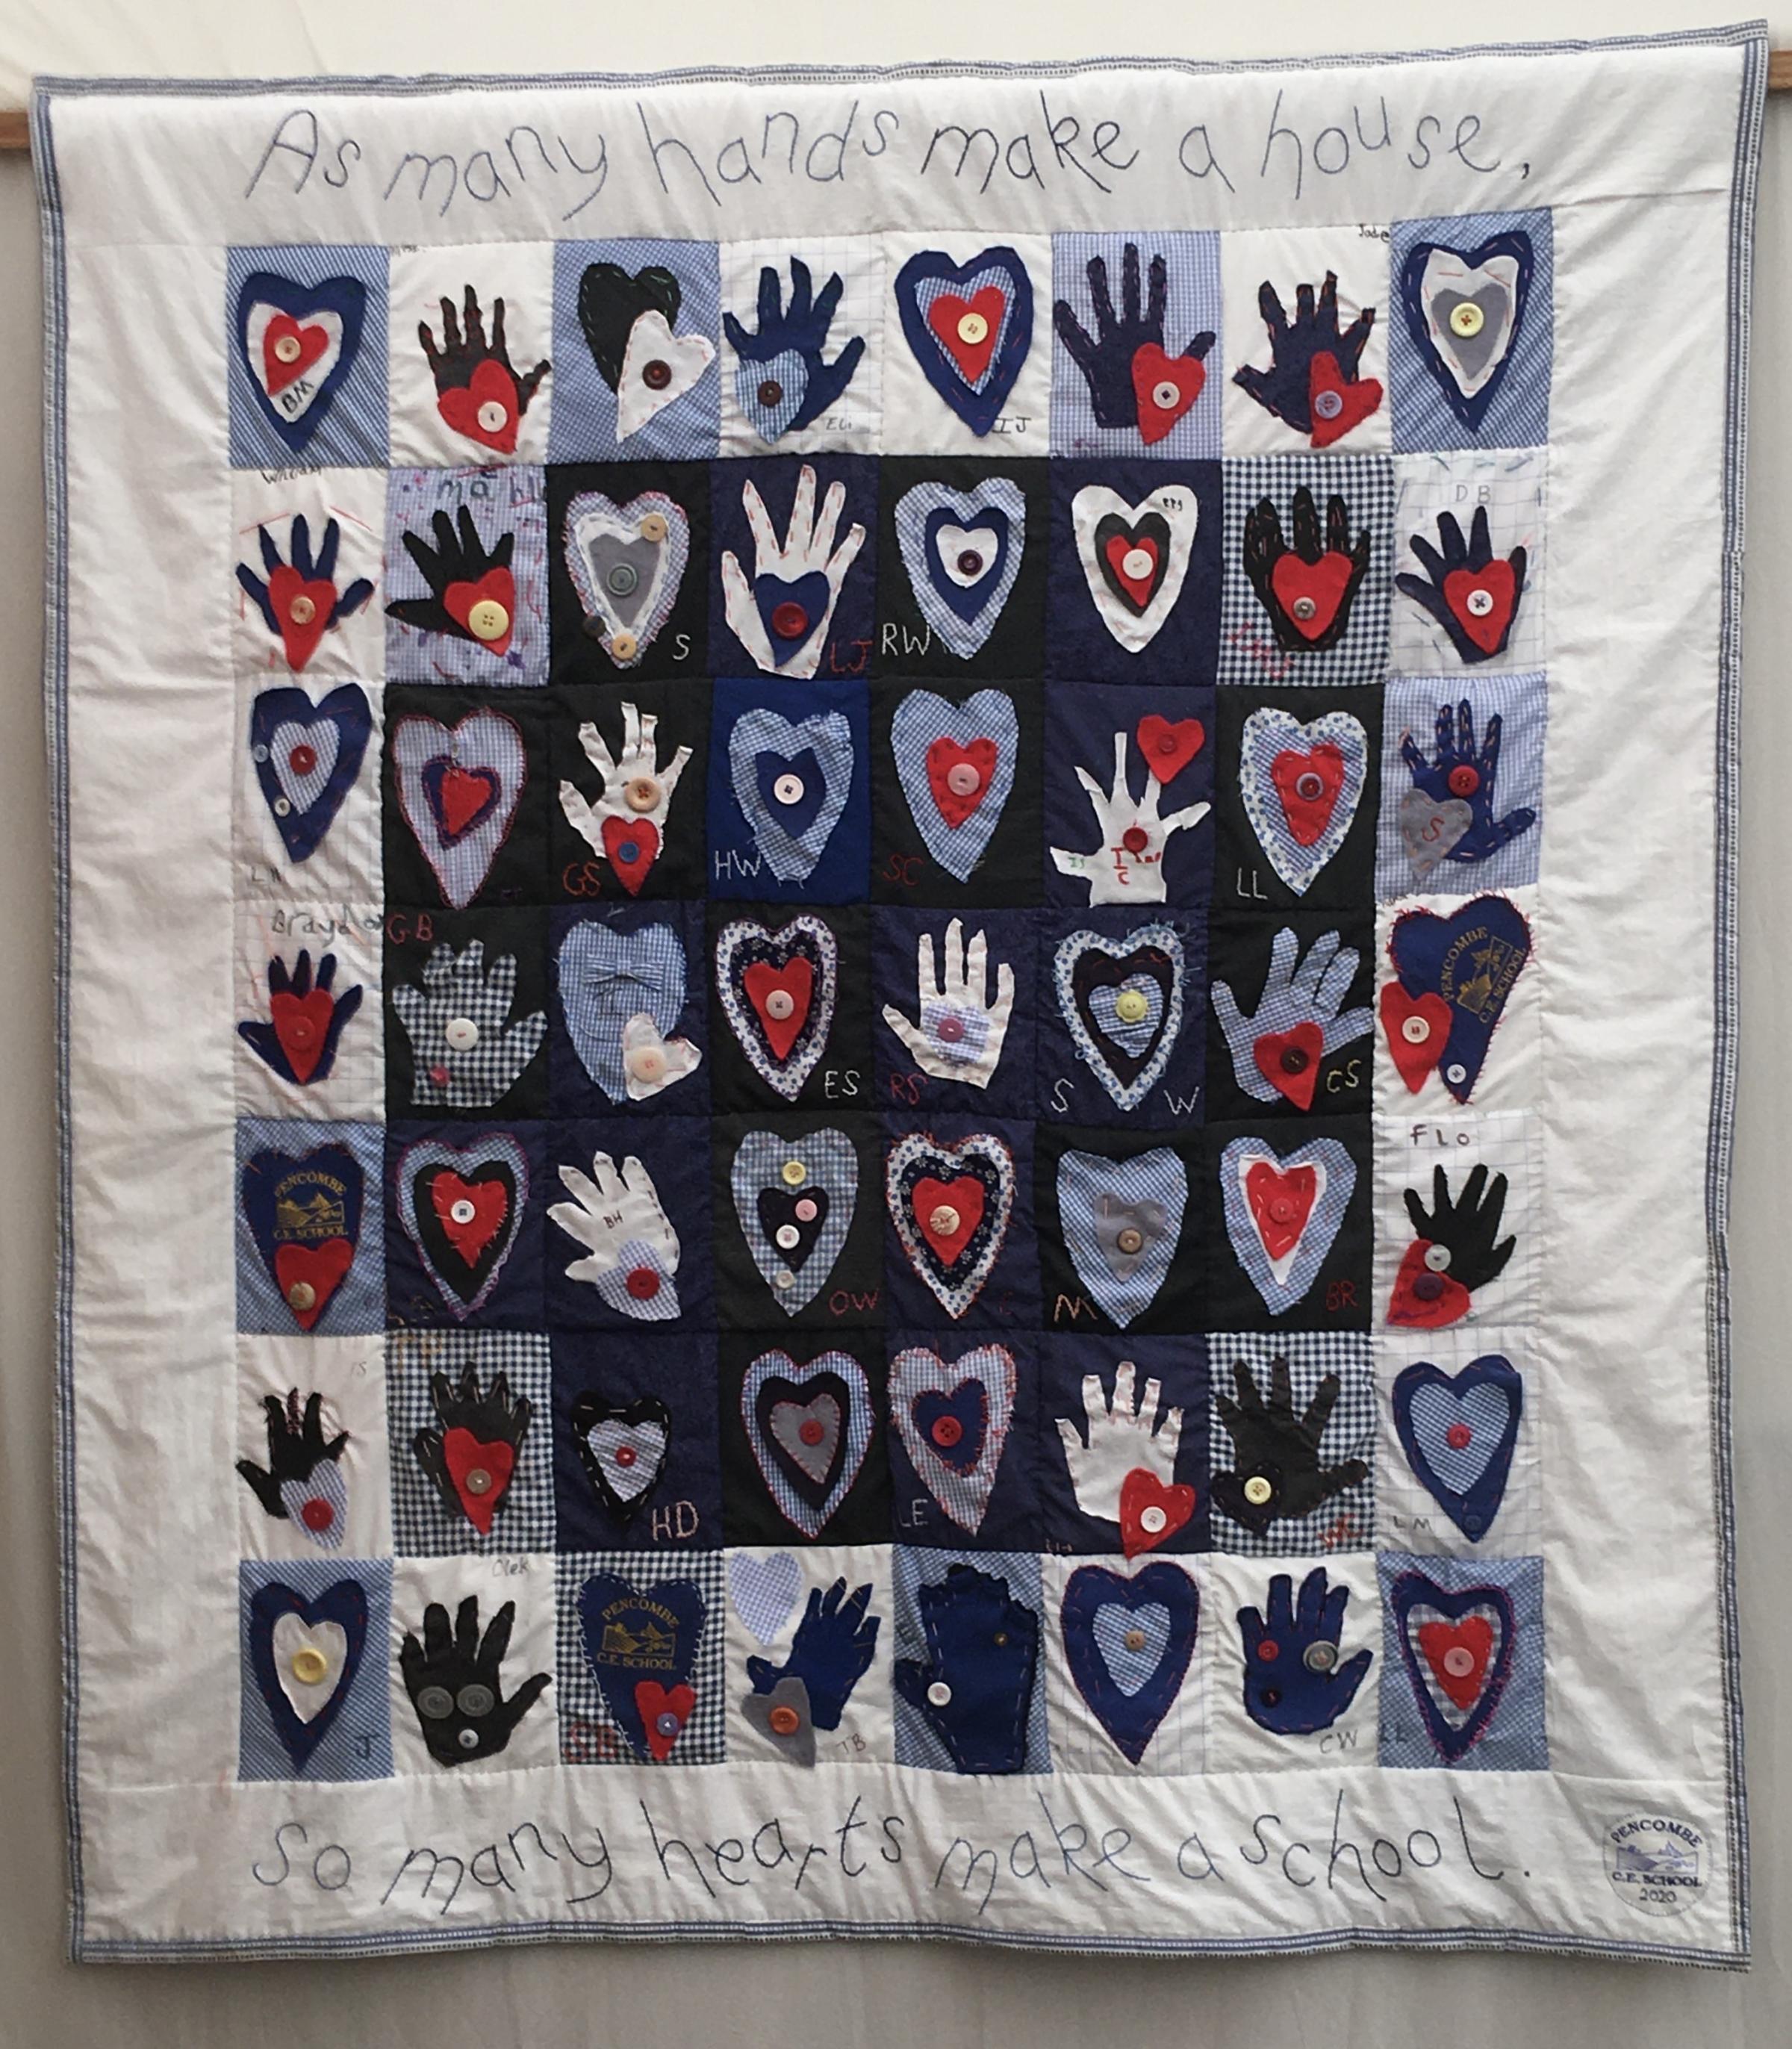 Under 16 Quilt Award: Many Hearts Make a School by Pencombe School